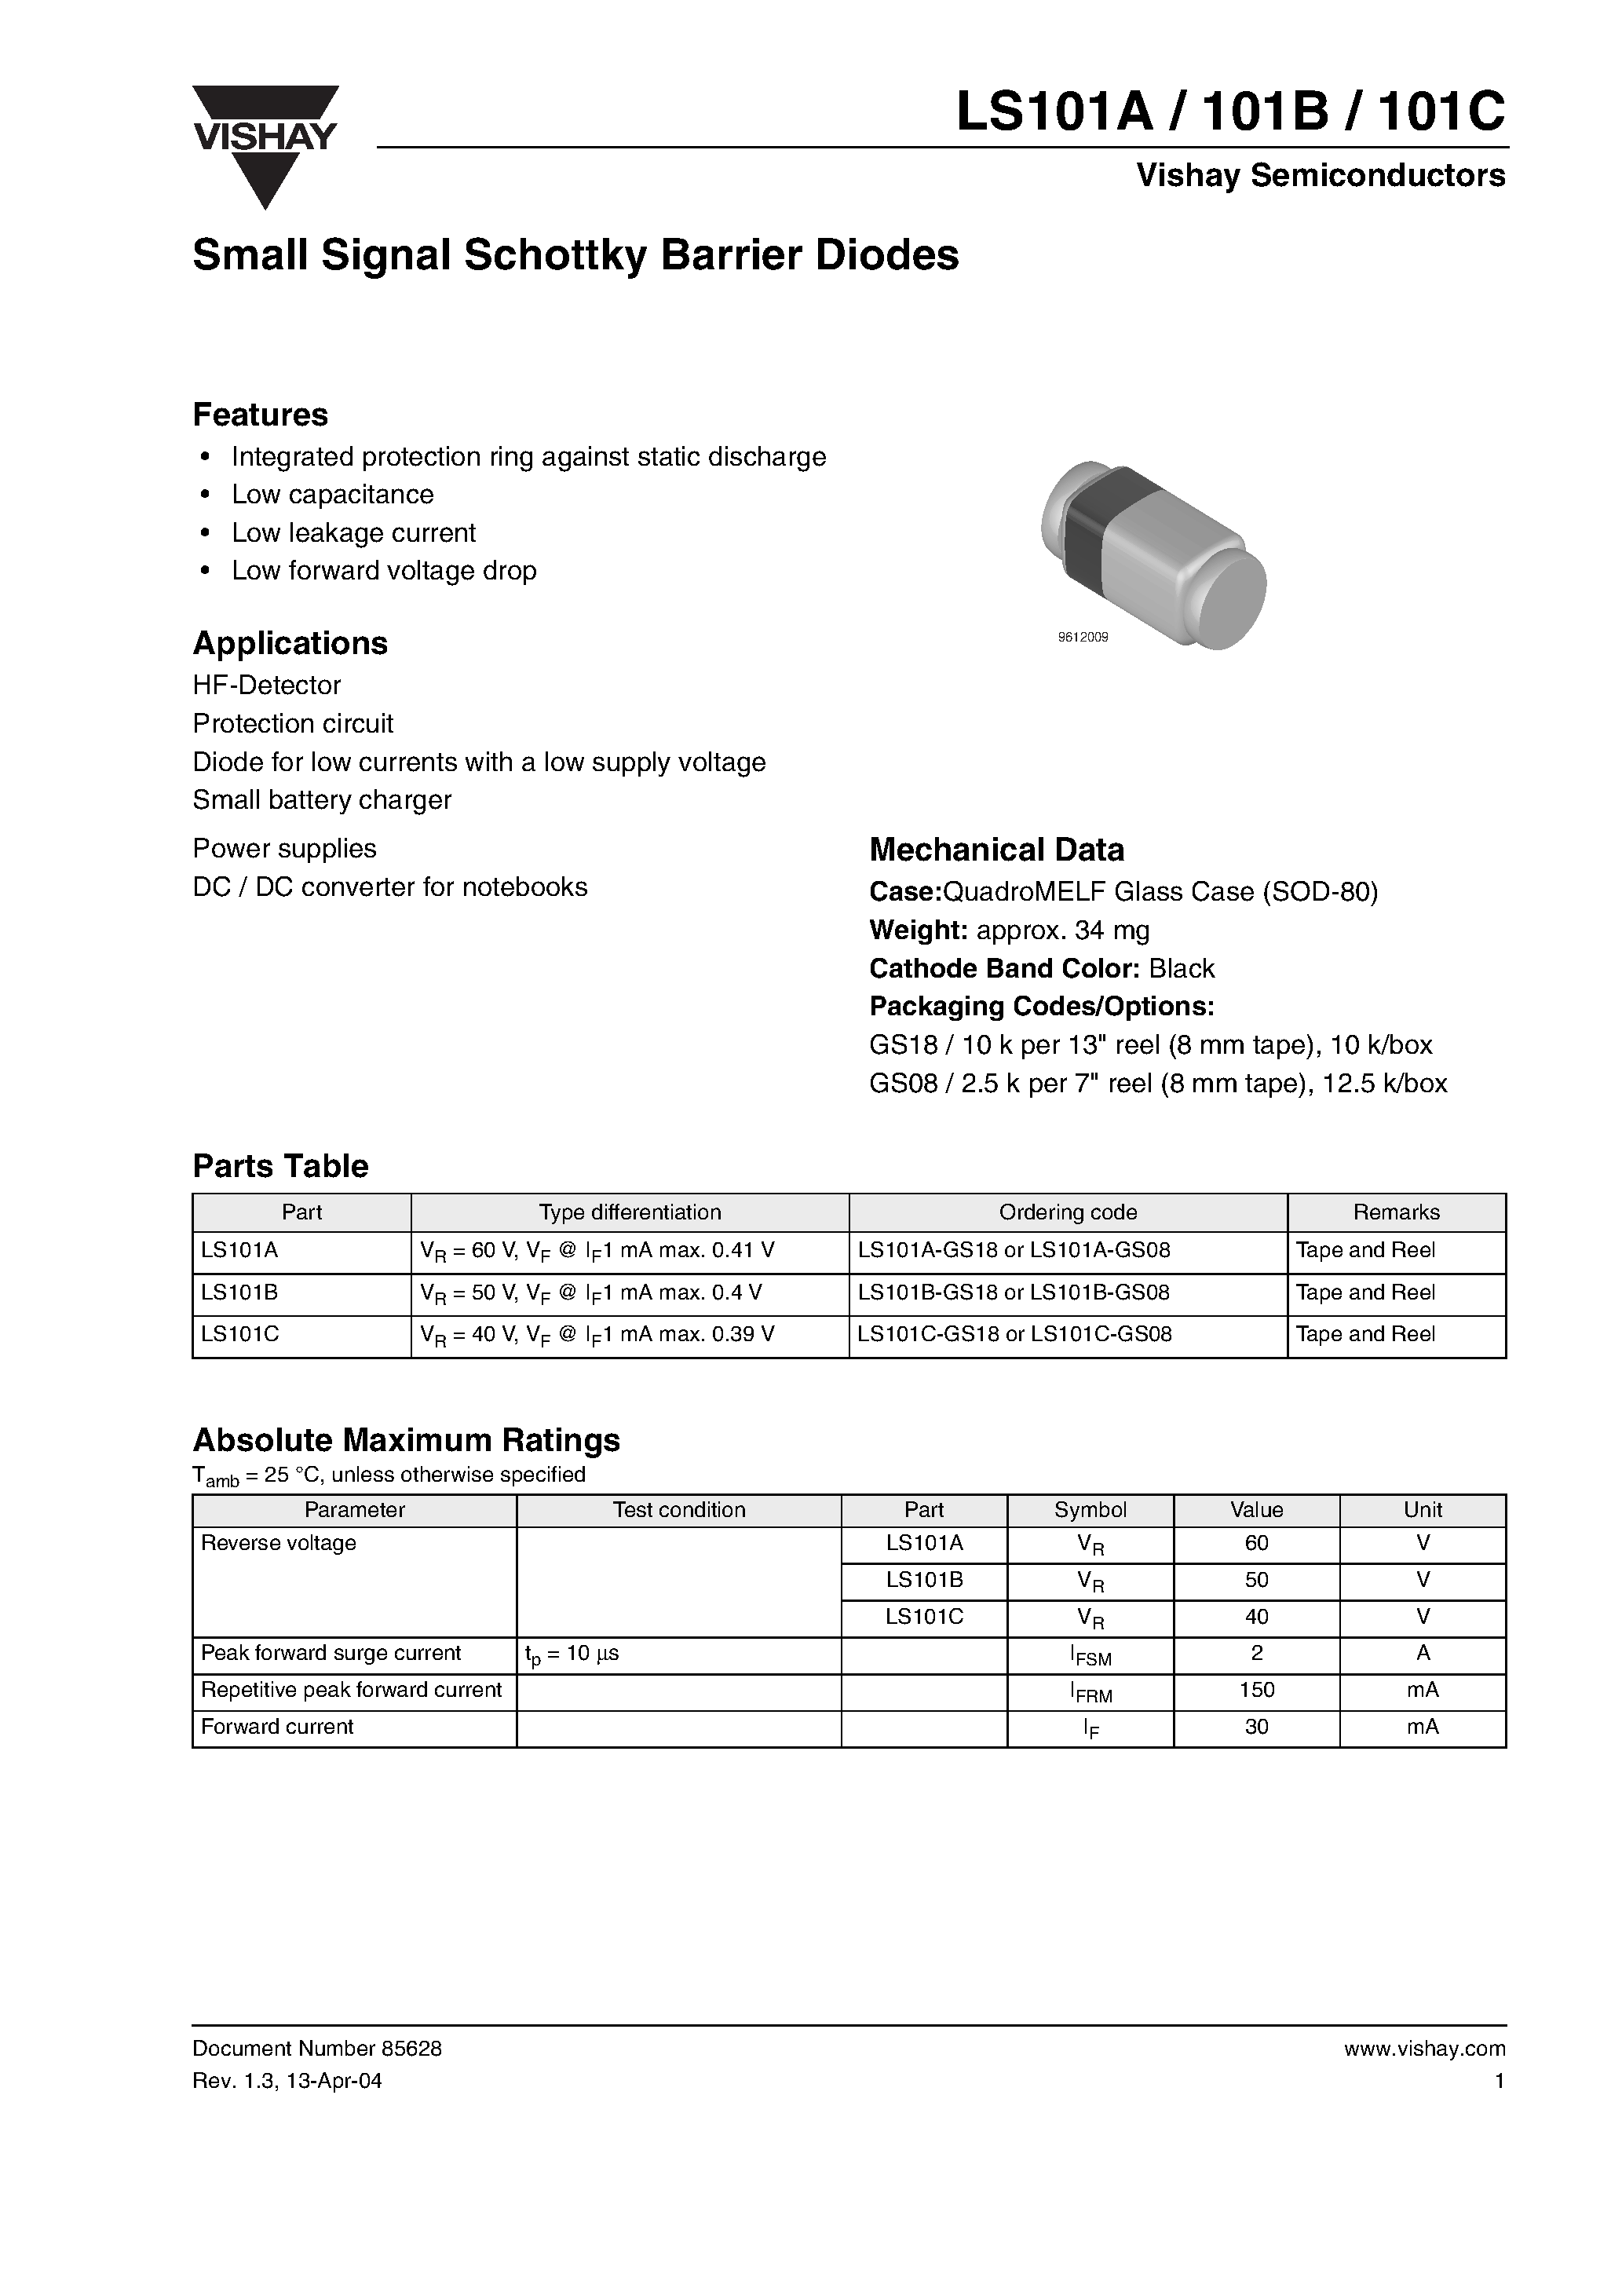 Datasheet LS101B-GS18 - Small Signal Schottky Barrier Diodes page 1